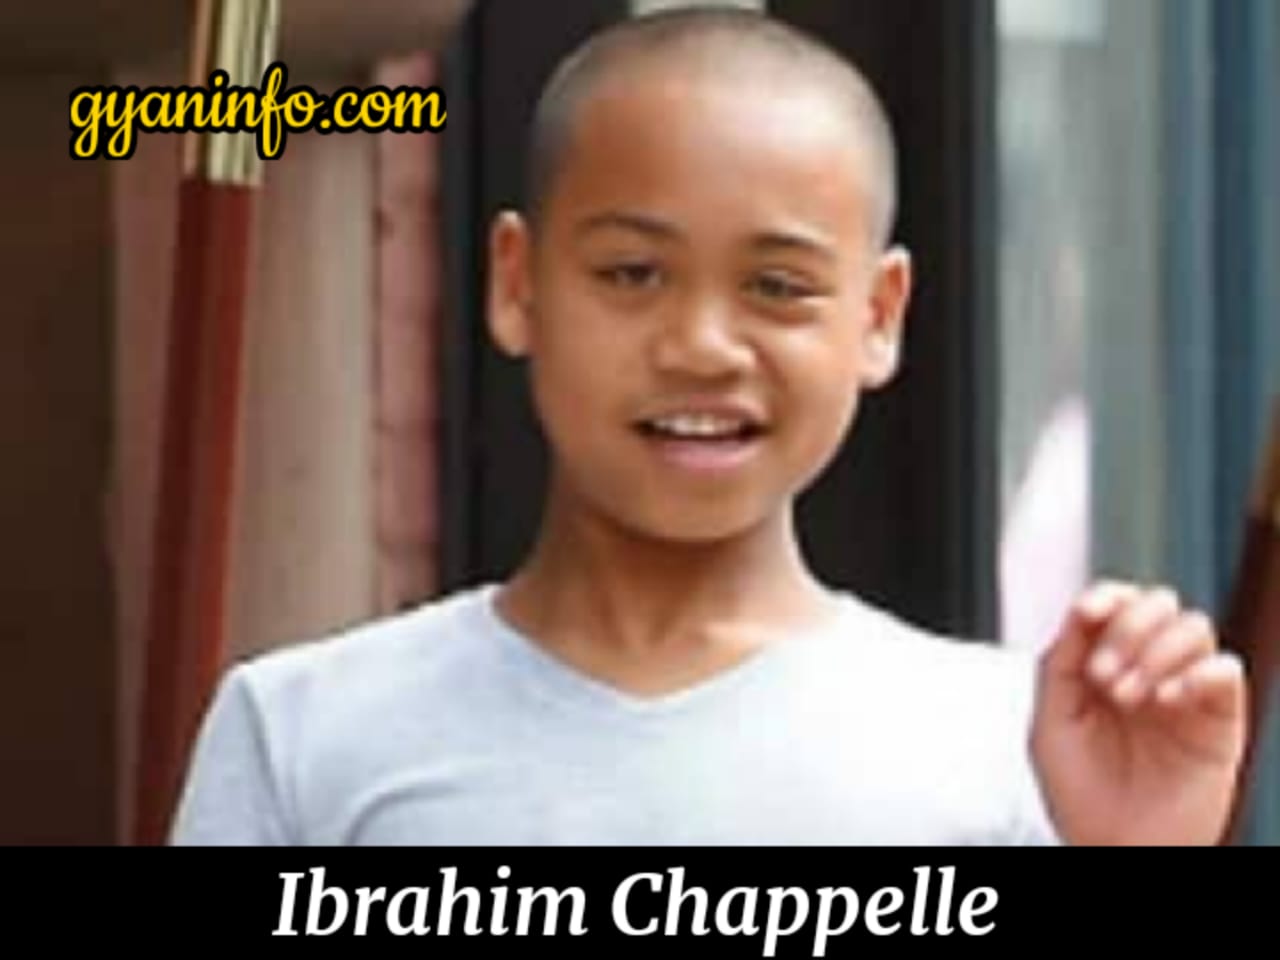 Ibrahim Chappelle Biography, Height, Age, Girlfriend, Parents, Net Worth, Wiki & More